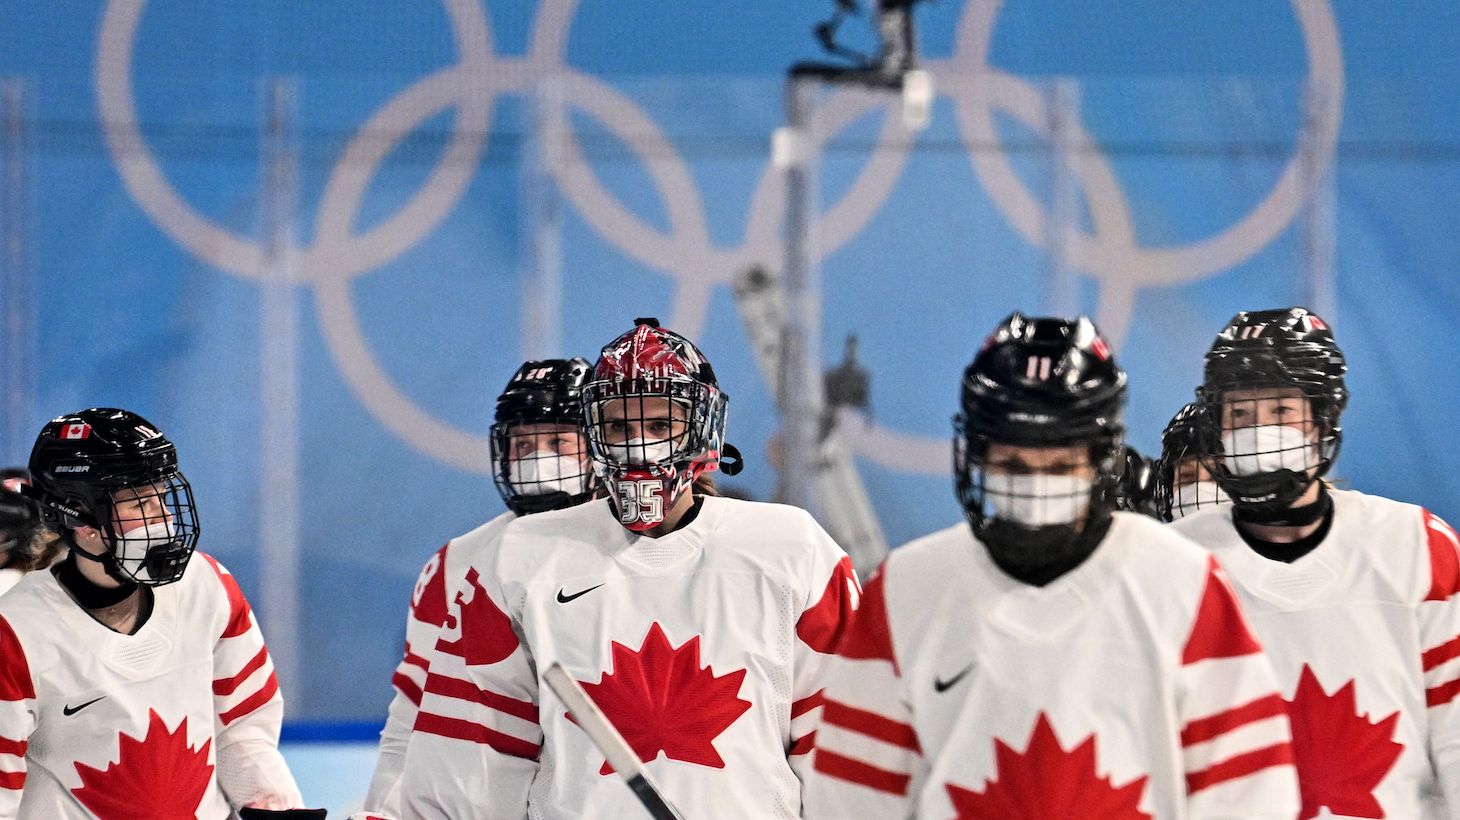 Canada's players react during the women's preliminary round group A match of the Beijing 2022 Winter Olympic Games ice hockey competition players of Russia's Olympic Committee and Canada, at the Wukesong Sports Centre in Beijing on February 7, 2022. (Photo by ANTHONY WALLACE / AFP) (Photo by ANTHONY WALLACE/AFP via Getty Images)